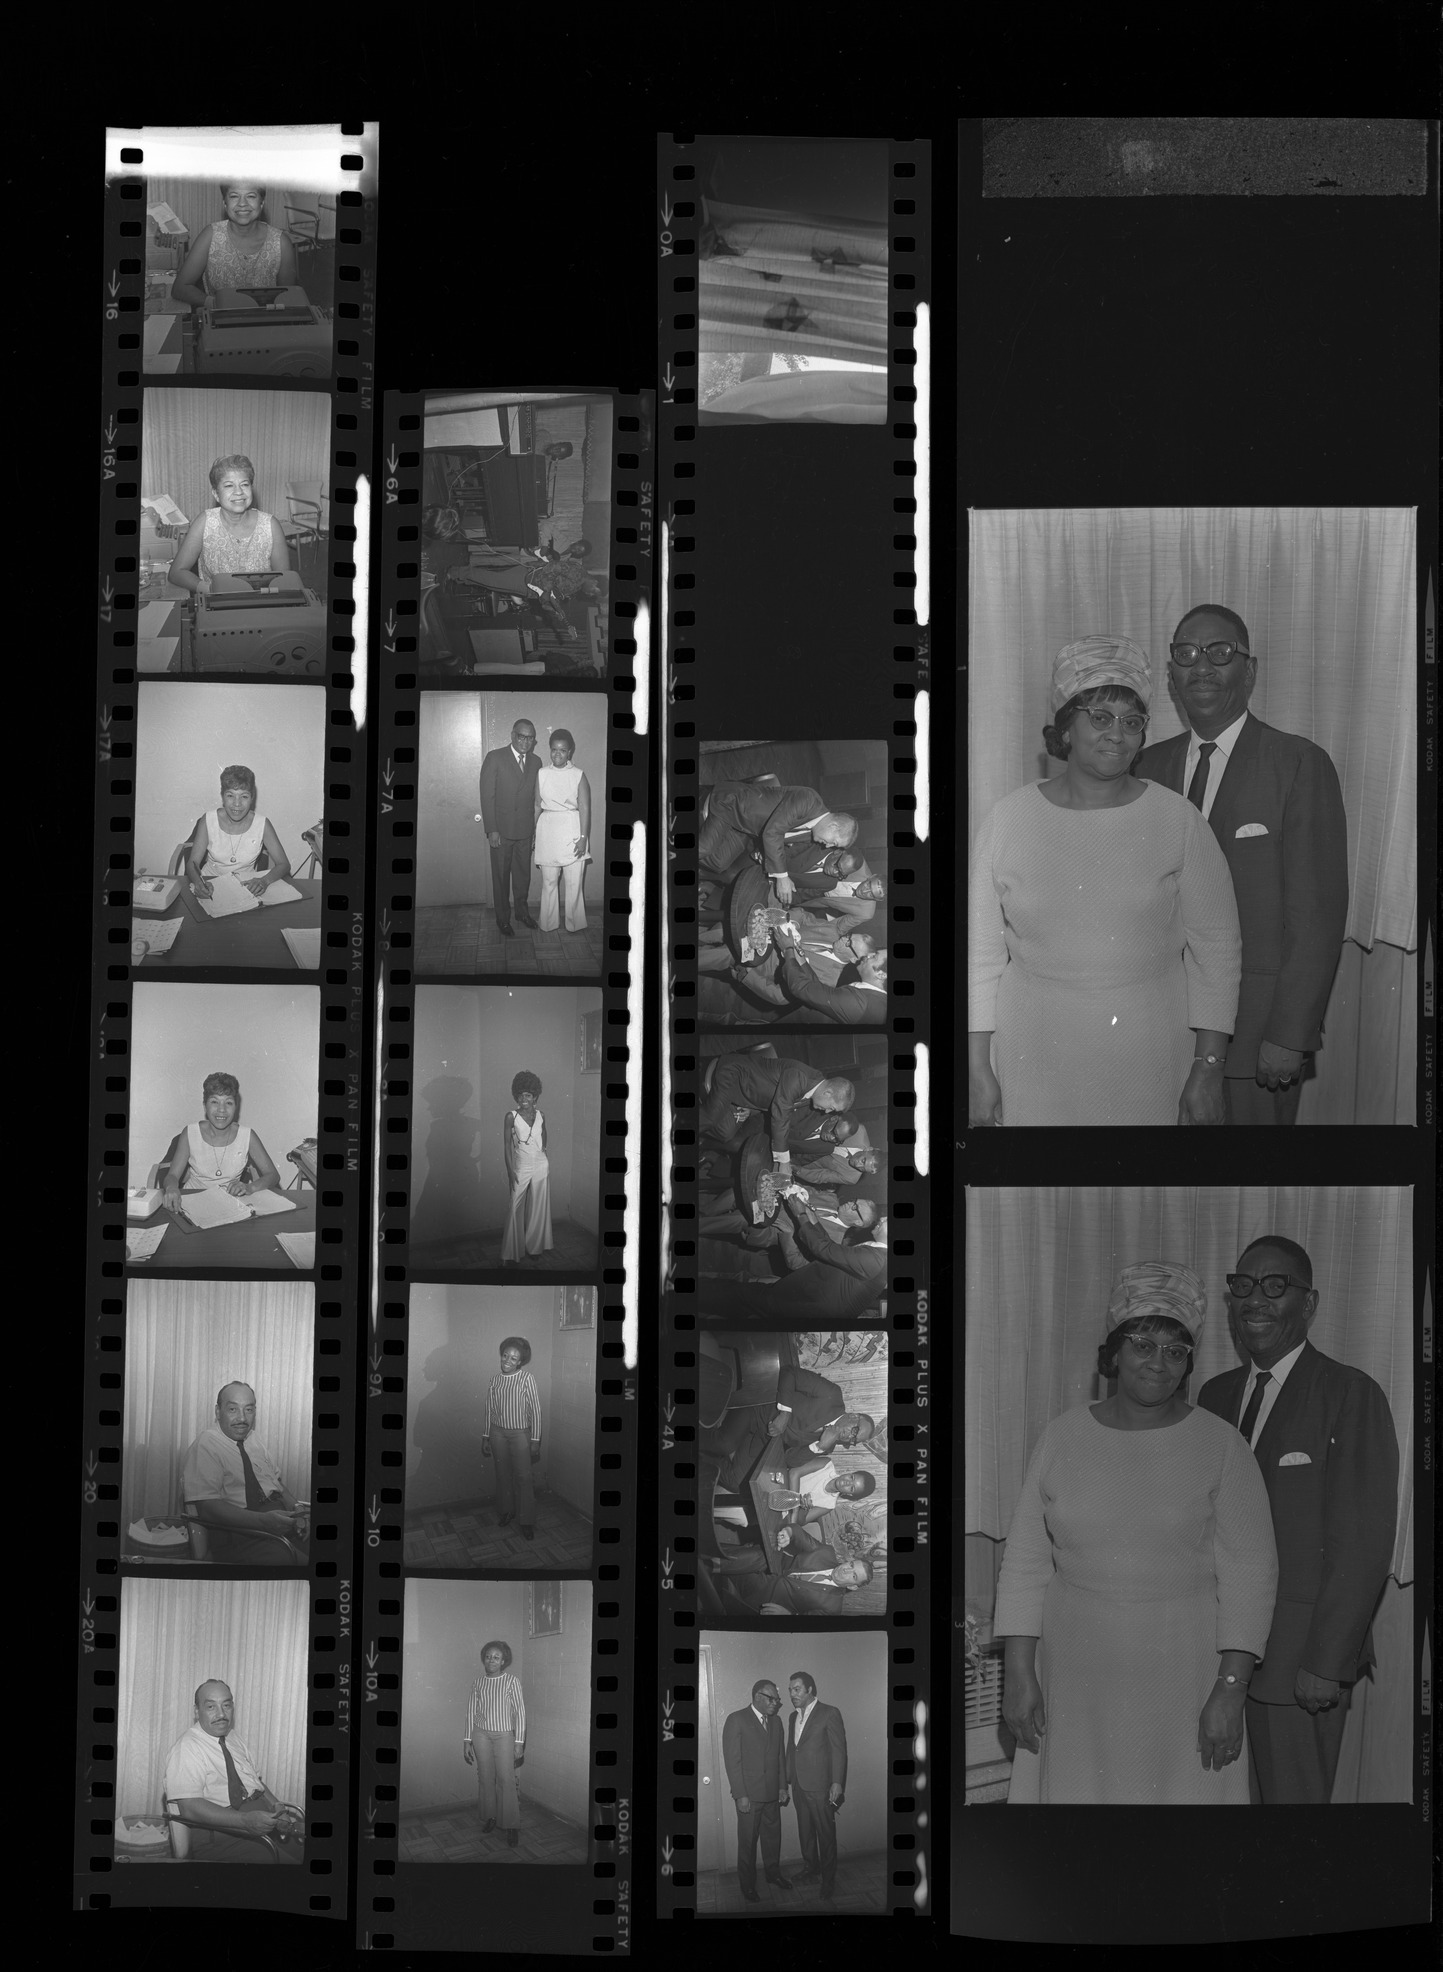 Set of negatives by Clinton Wright including meeting at Doolittle, Upperoom Church, Landmark, Voice staff, Henry Miller's party at Sugar Hill, and Bishop and Sister Webb, 1969, page 1